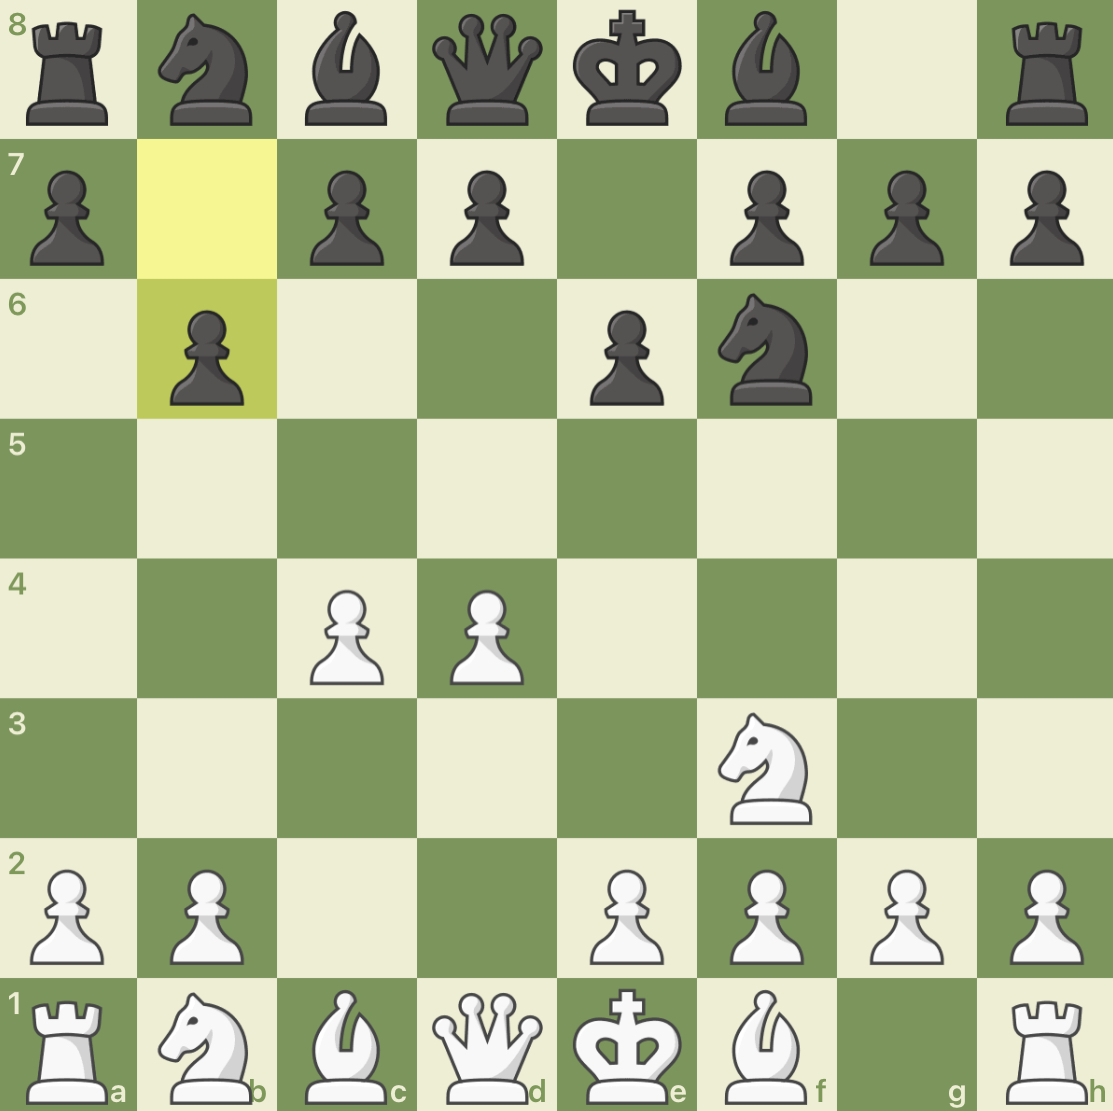 Chess Hindi : Game in queen pawn opening 